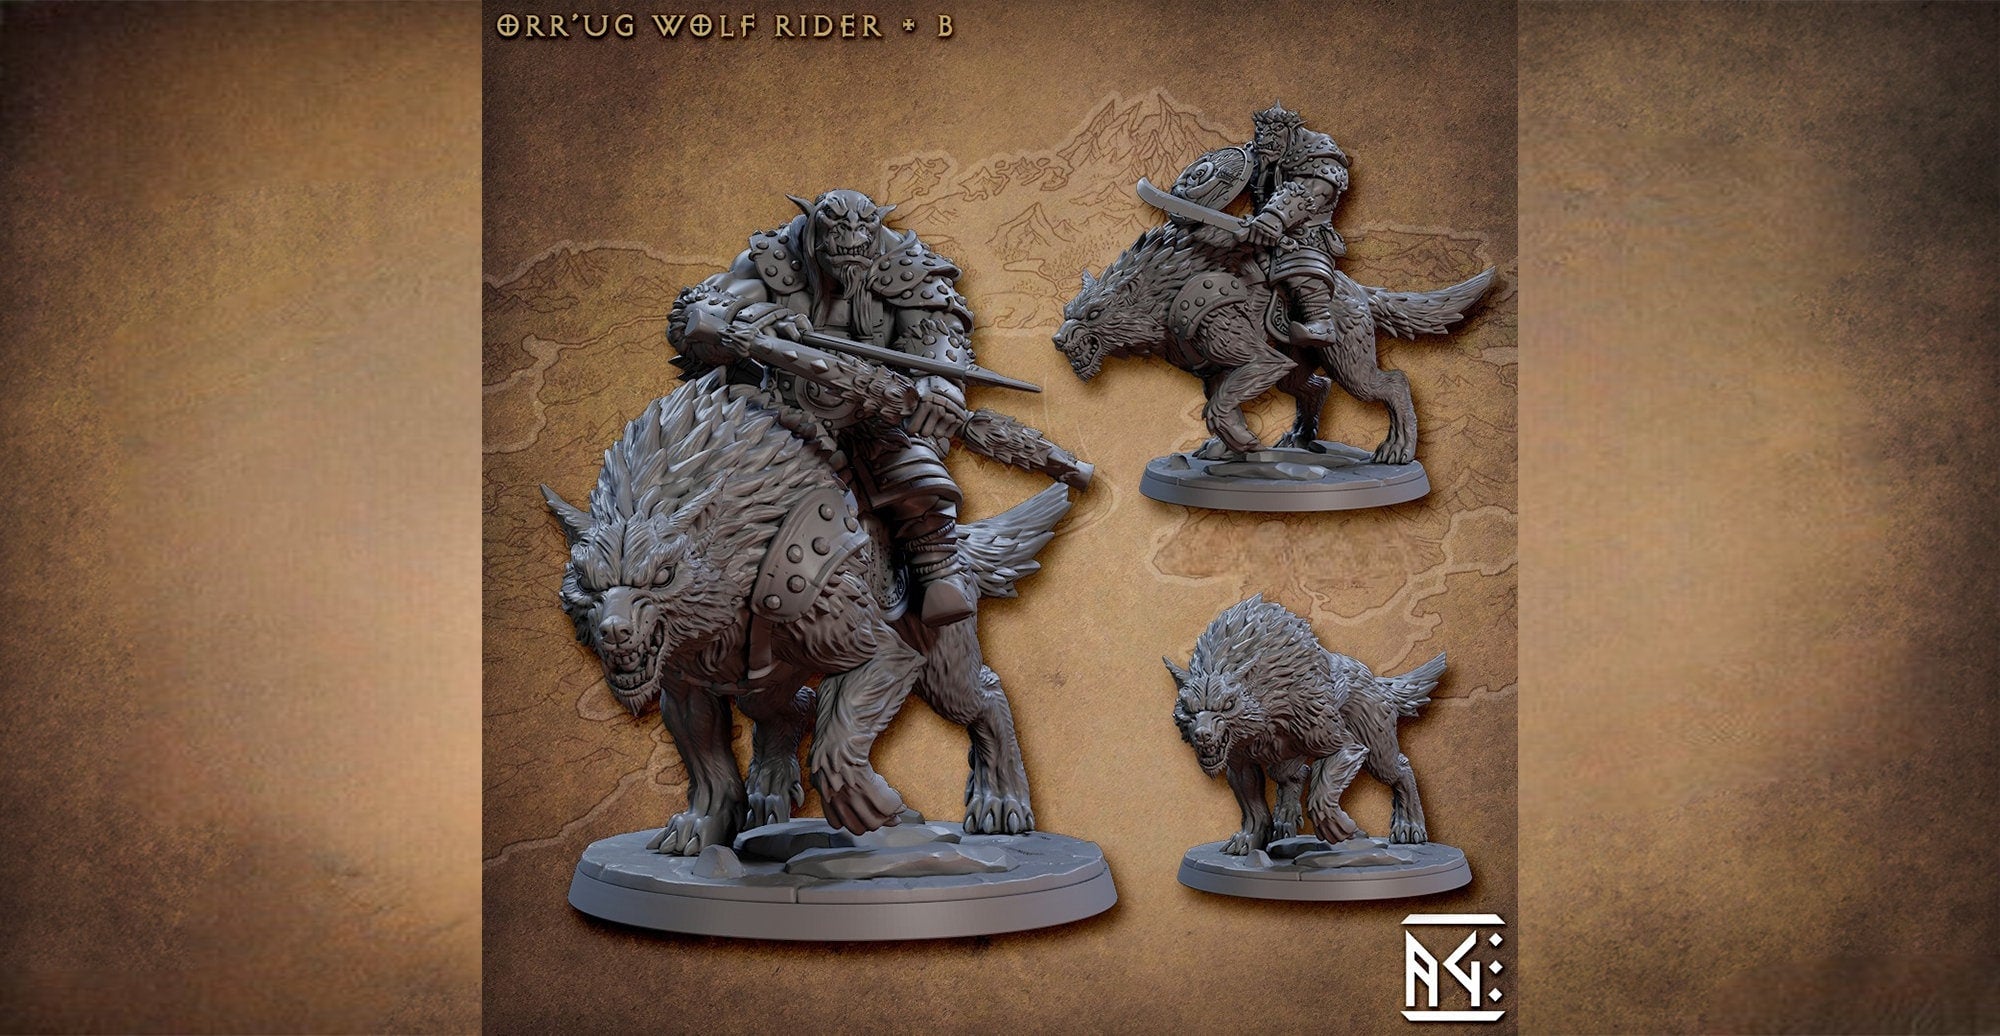 Orc / Worg "Orr'ug Wolf Rider B" Fighter | 8K 3D Print-Role Playing Miniatures